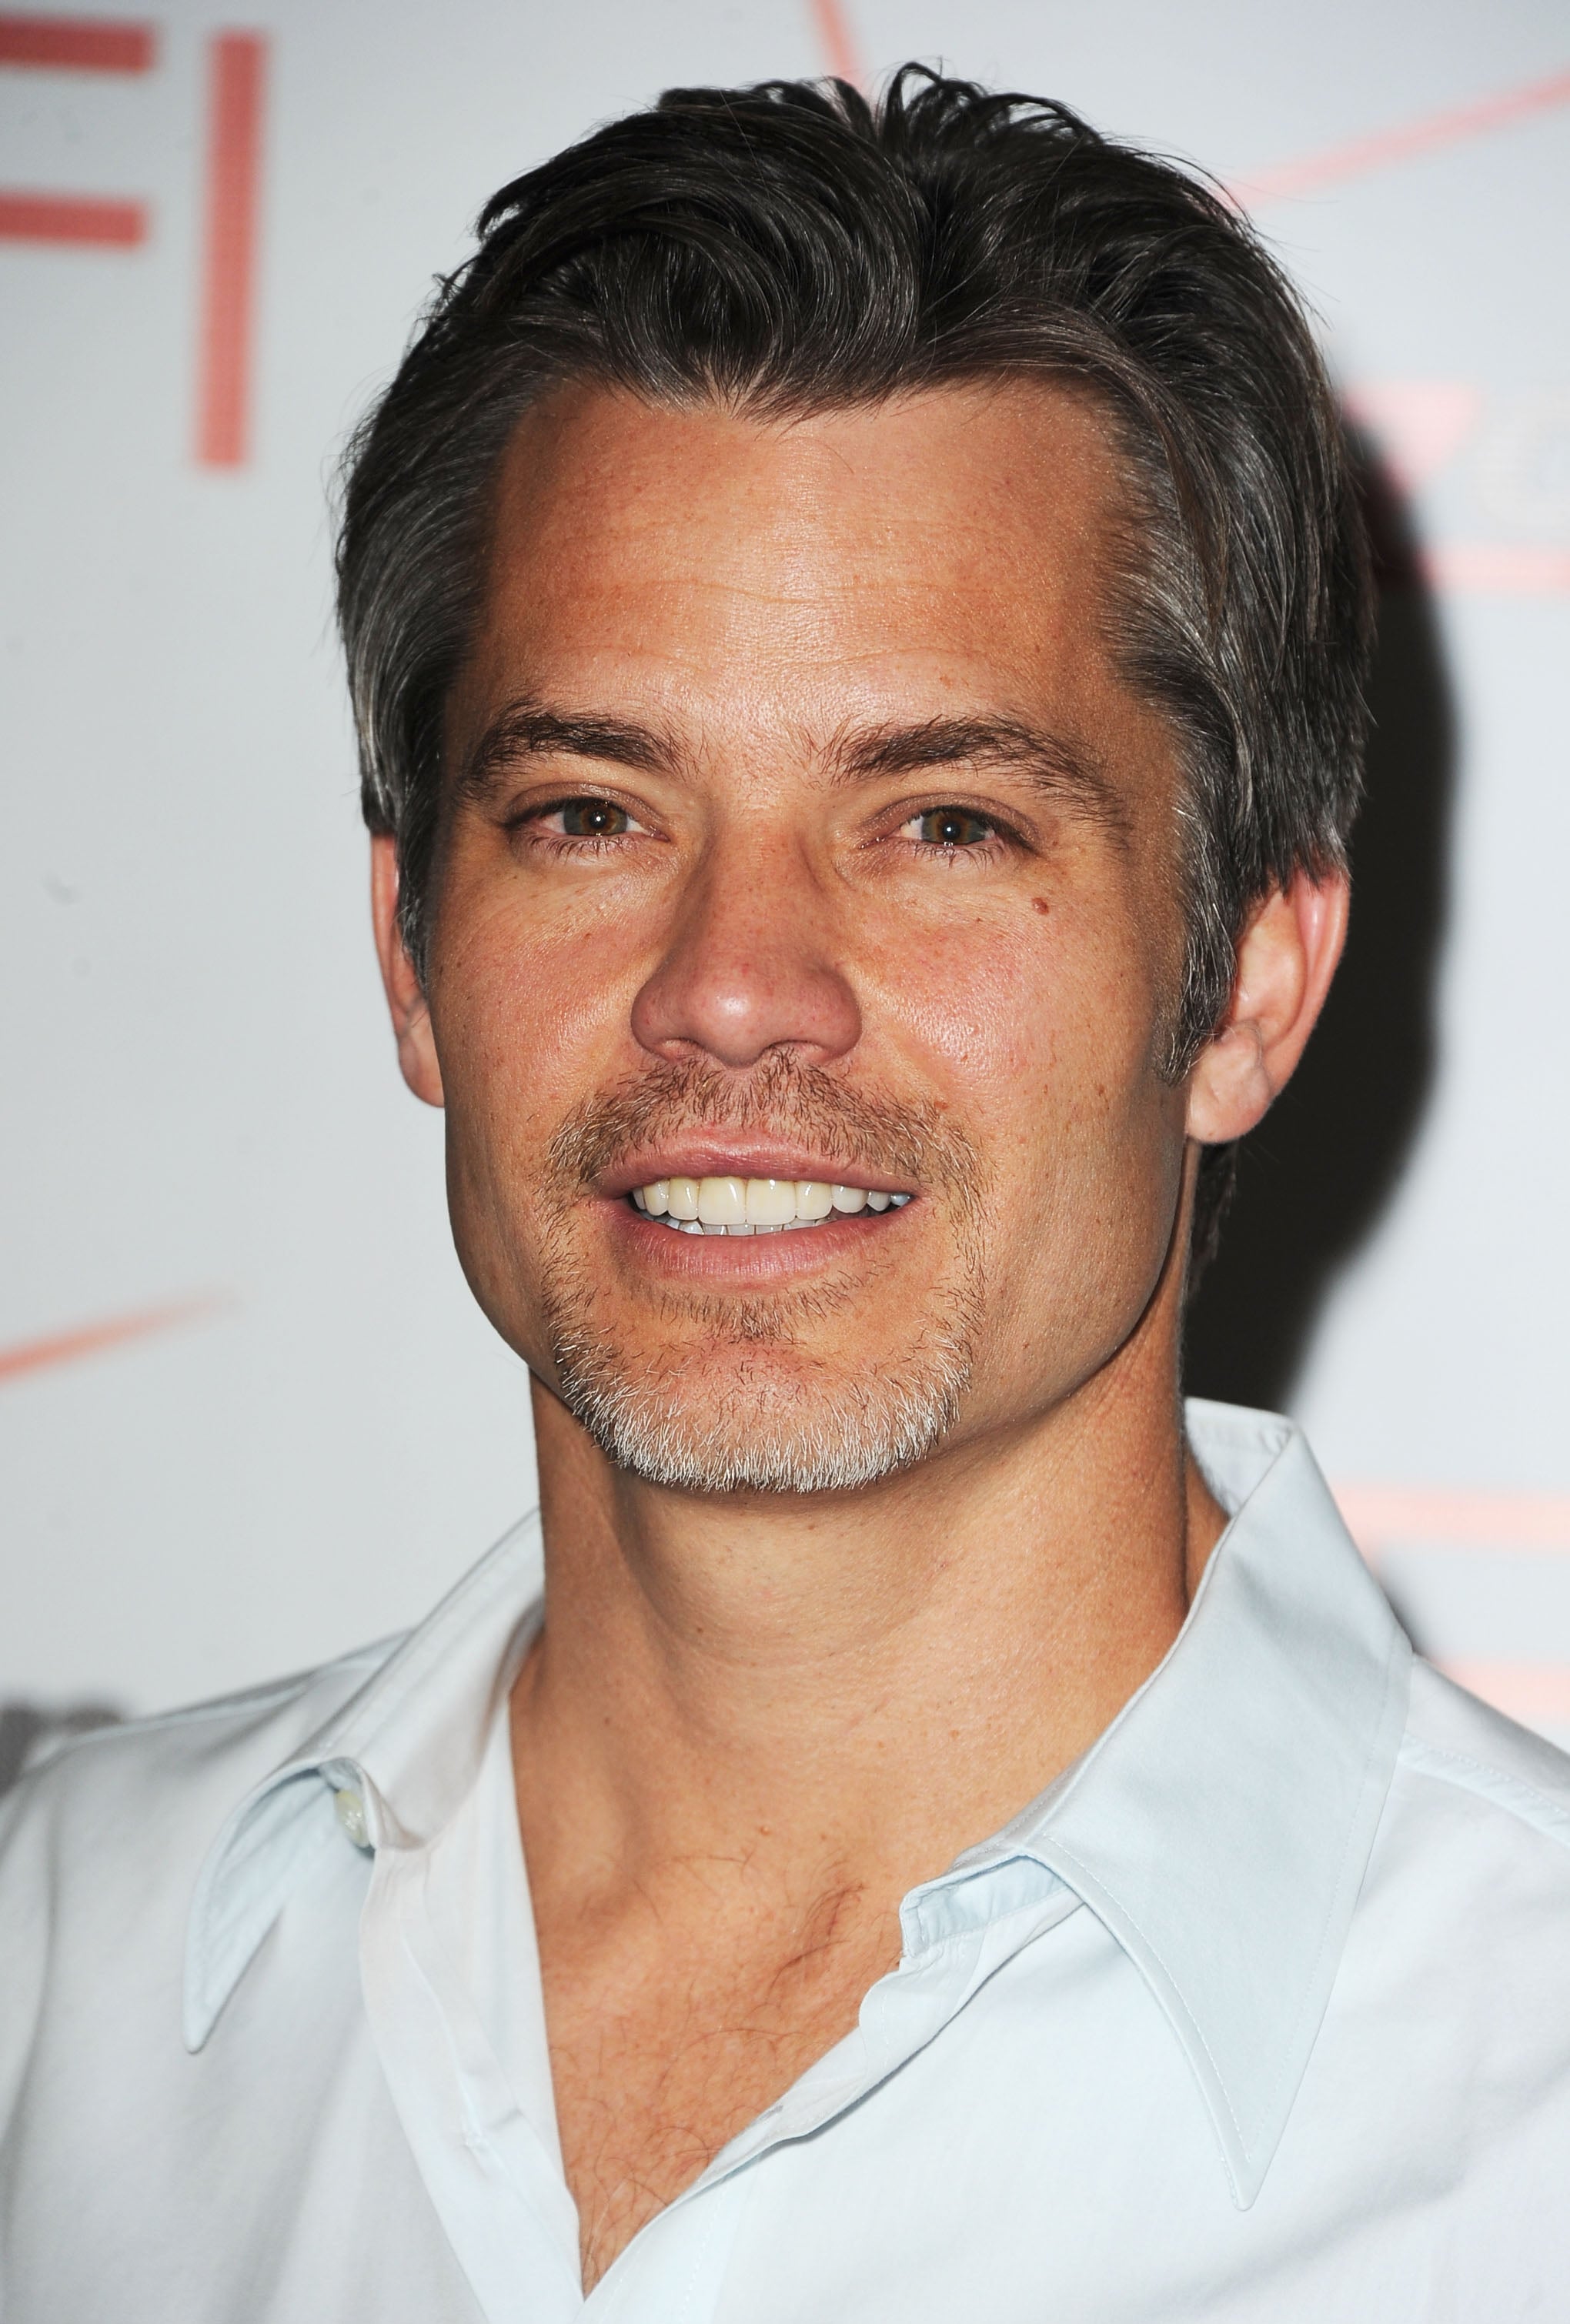 Timothy Olyphant as Danny Cordray. played a reoccurring role as Danny Cordr...